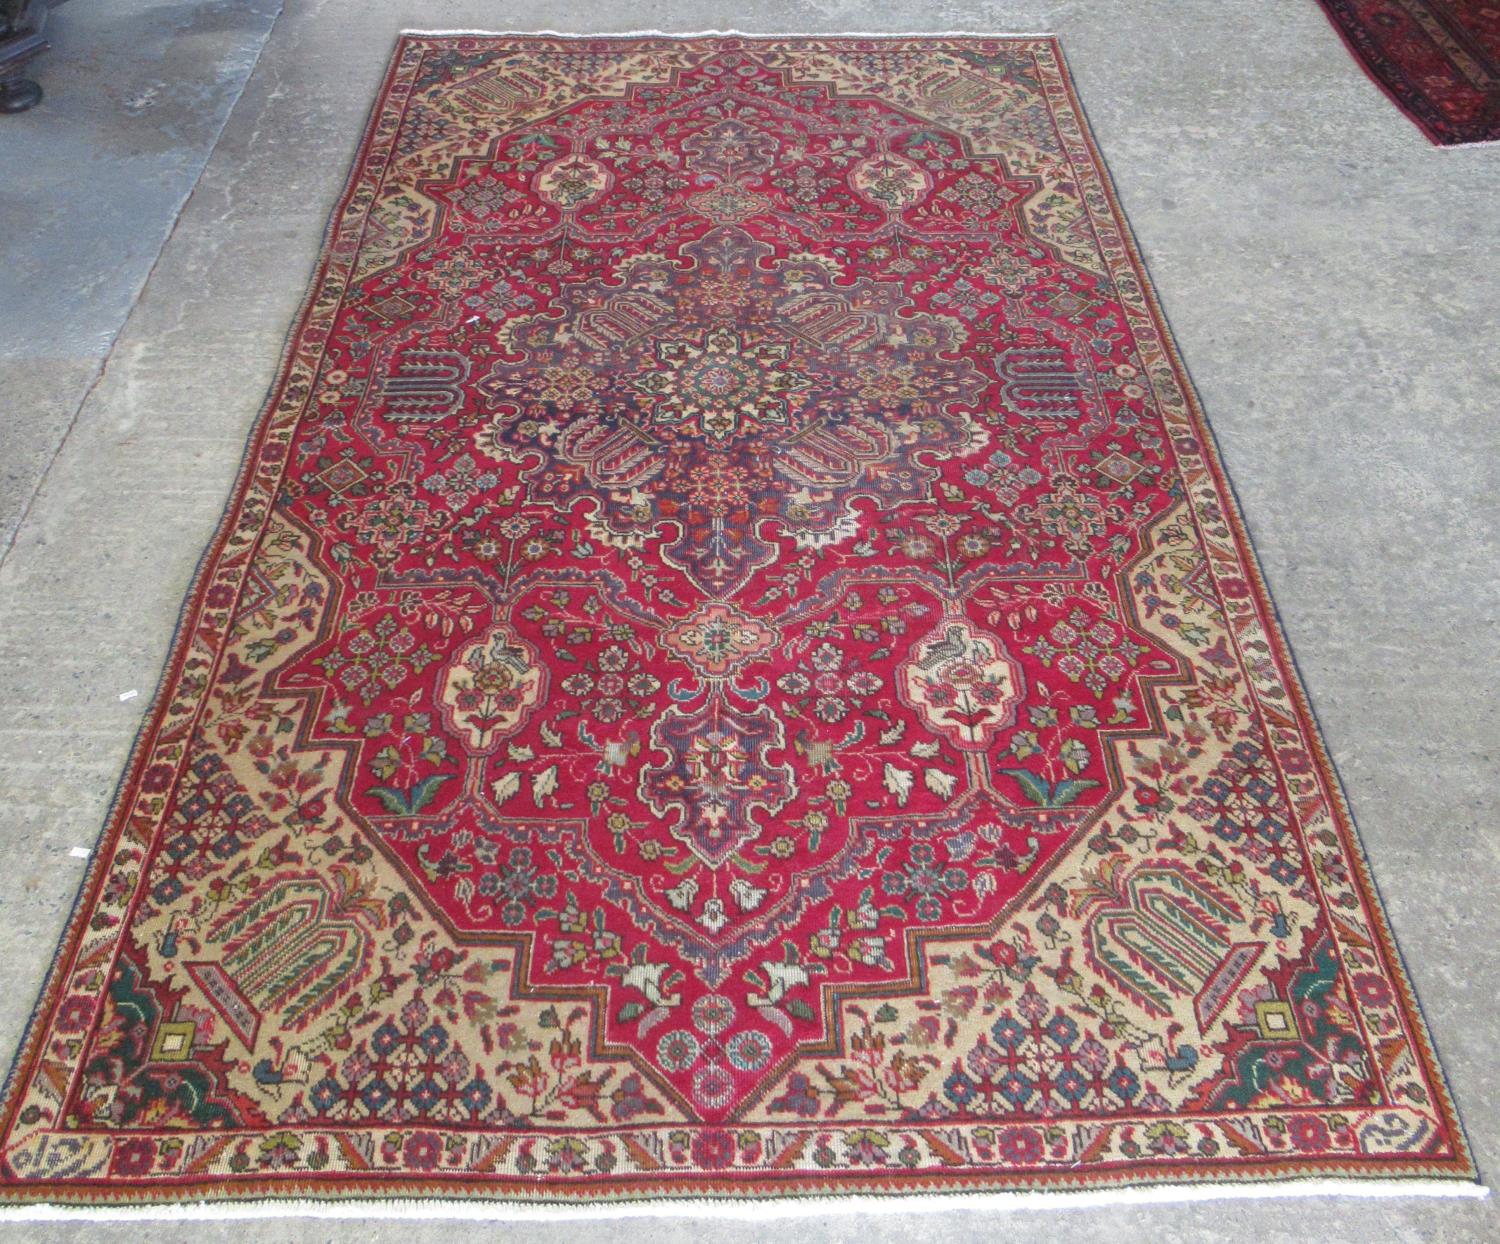 Vintage style Morty multi-coloured ground Persian Tabrez carpet with central medallions of flowers